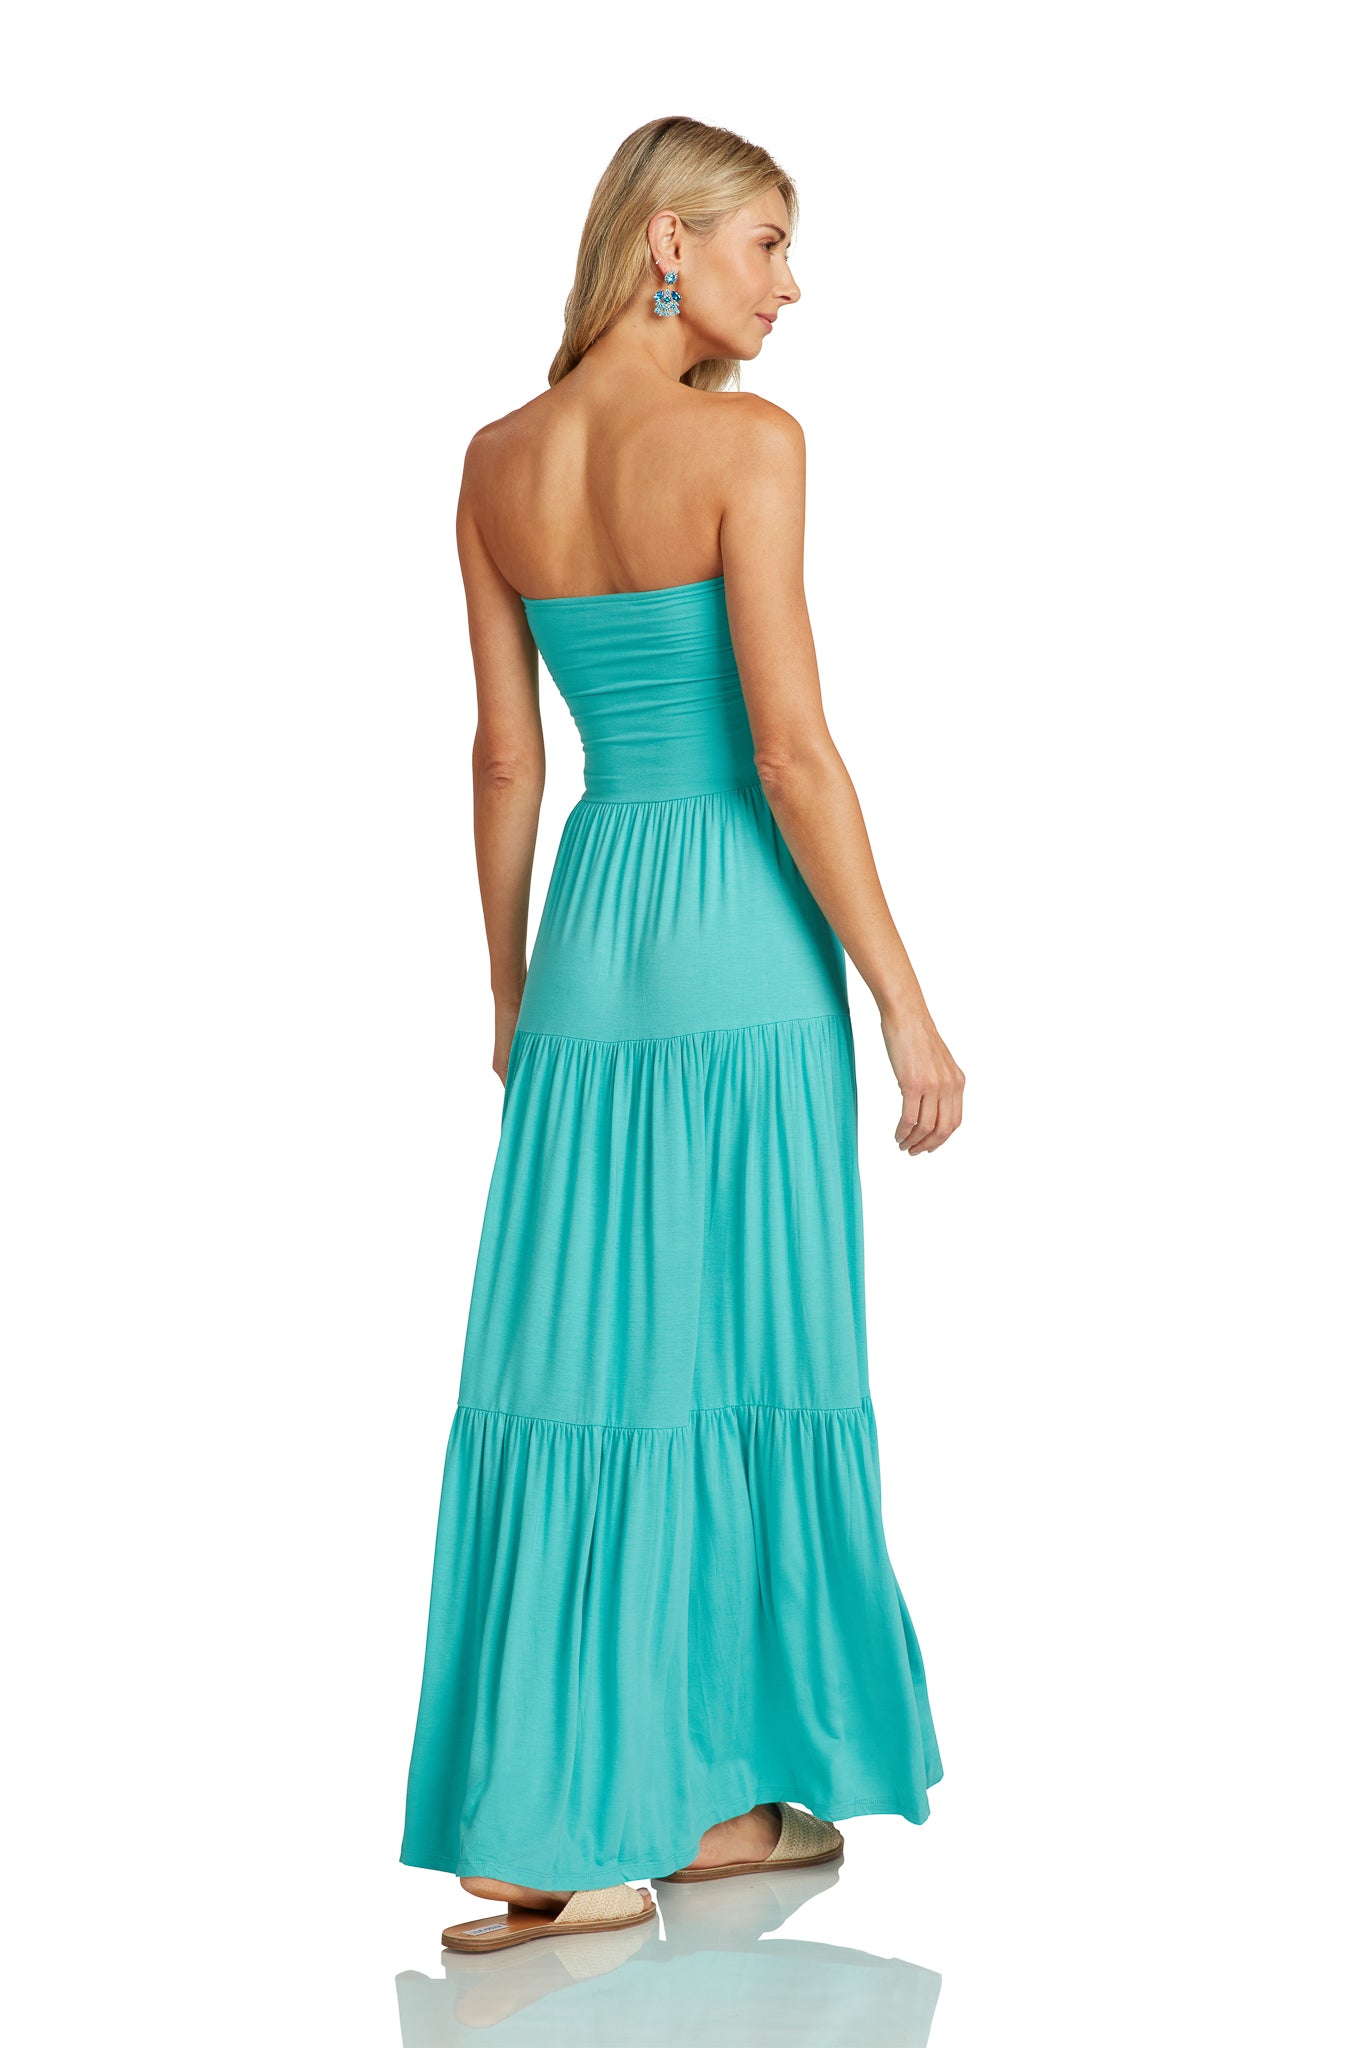 $99.99 DRESS EVENT LUCILLE MAXI DRESS TURQUOISE